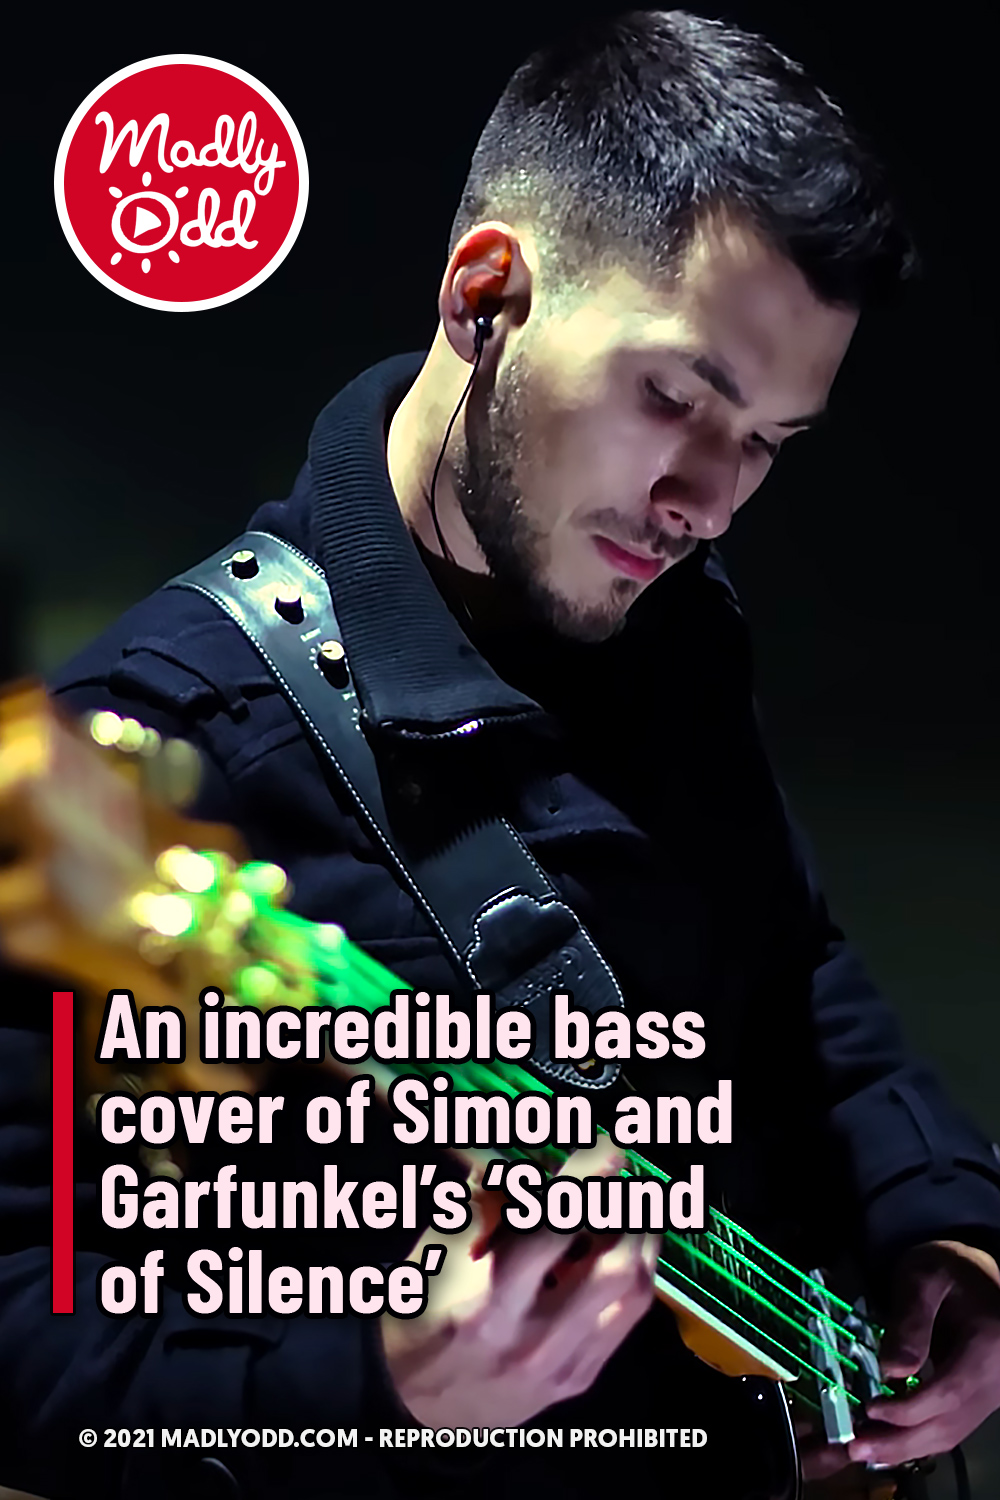 An incredible bass cover of Simon and Garfunkel’s ‘Sound of Silence’